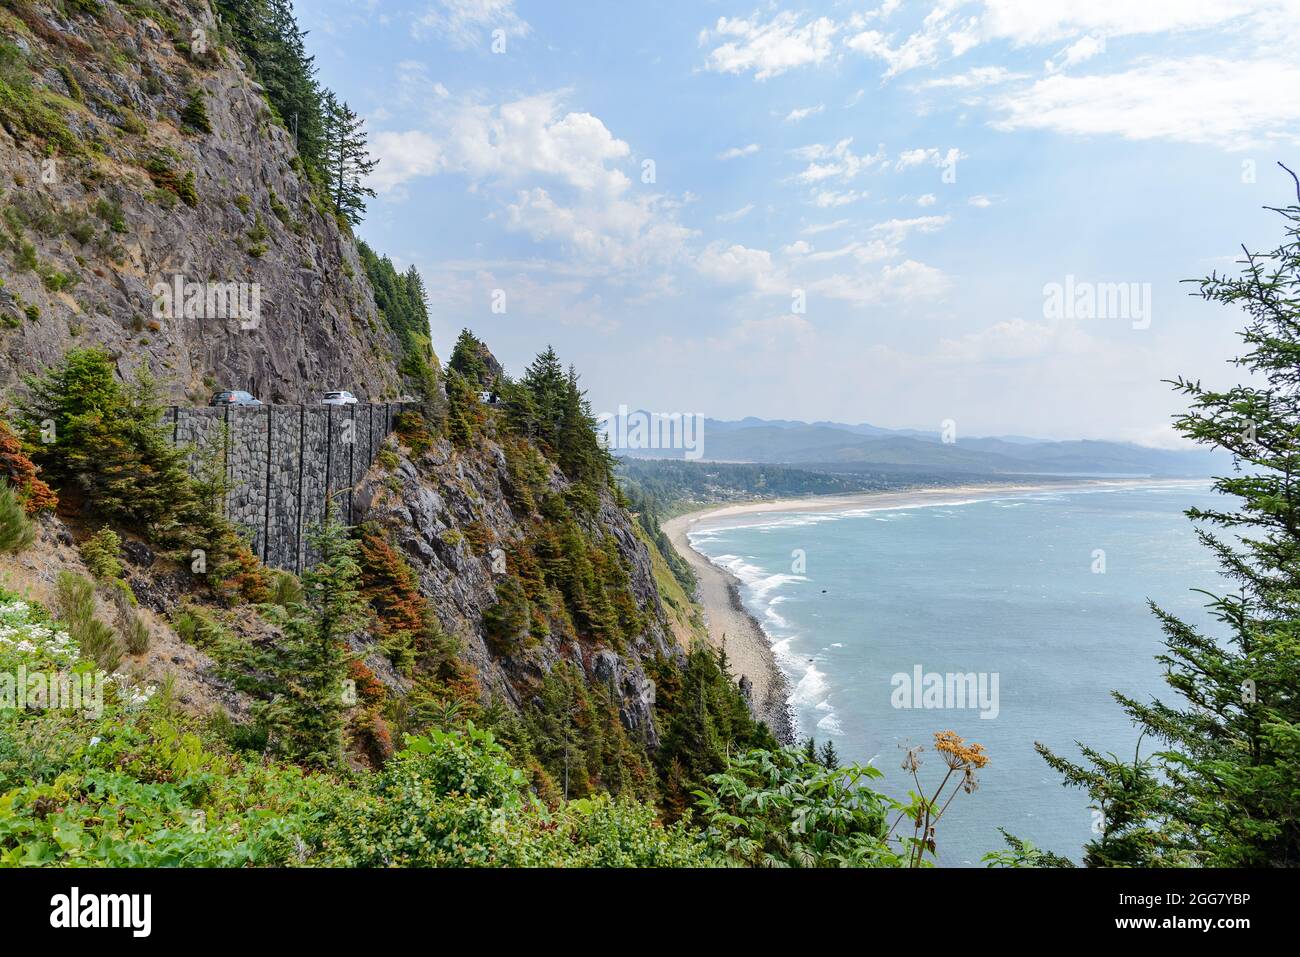 US Highway 101 cuts rocky cliff along the Pacific coast. Oregon, USA. Stock Photo